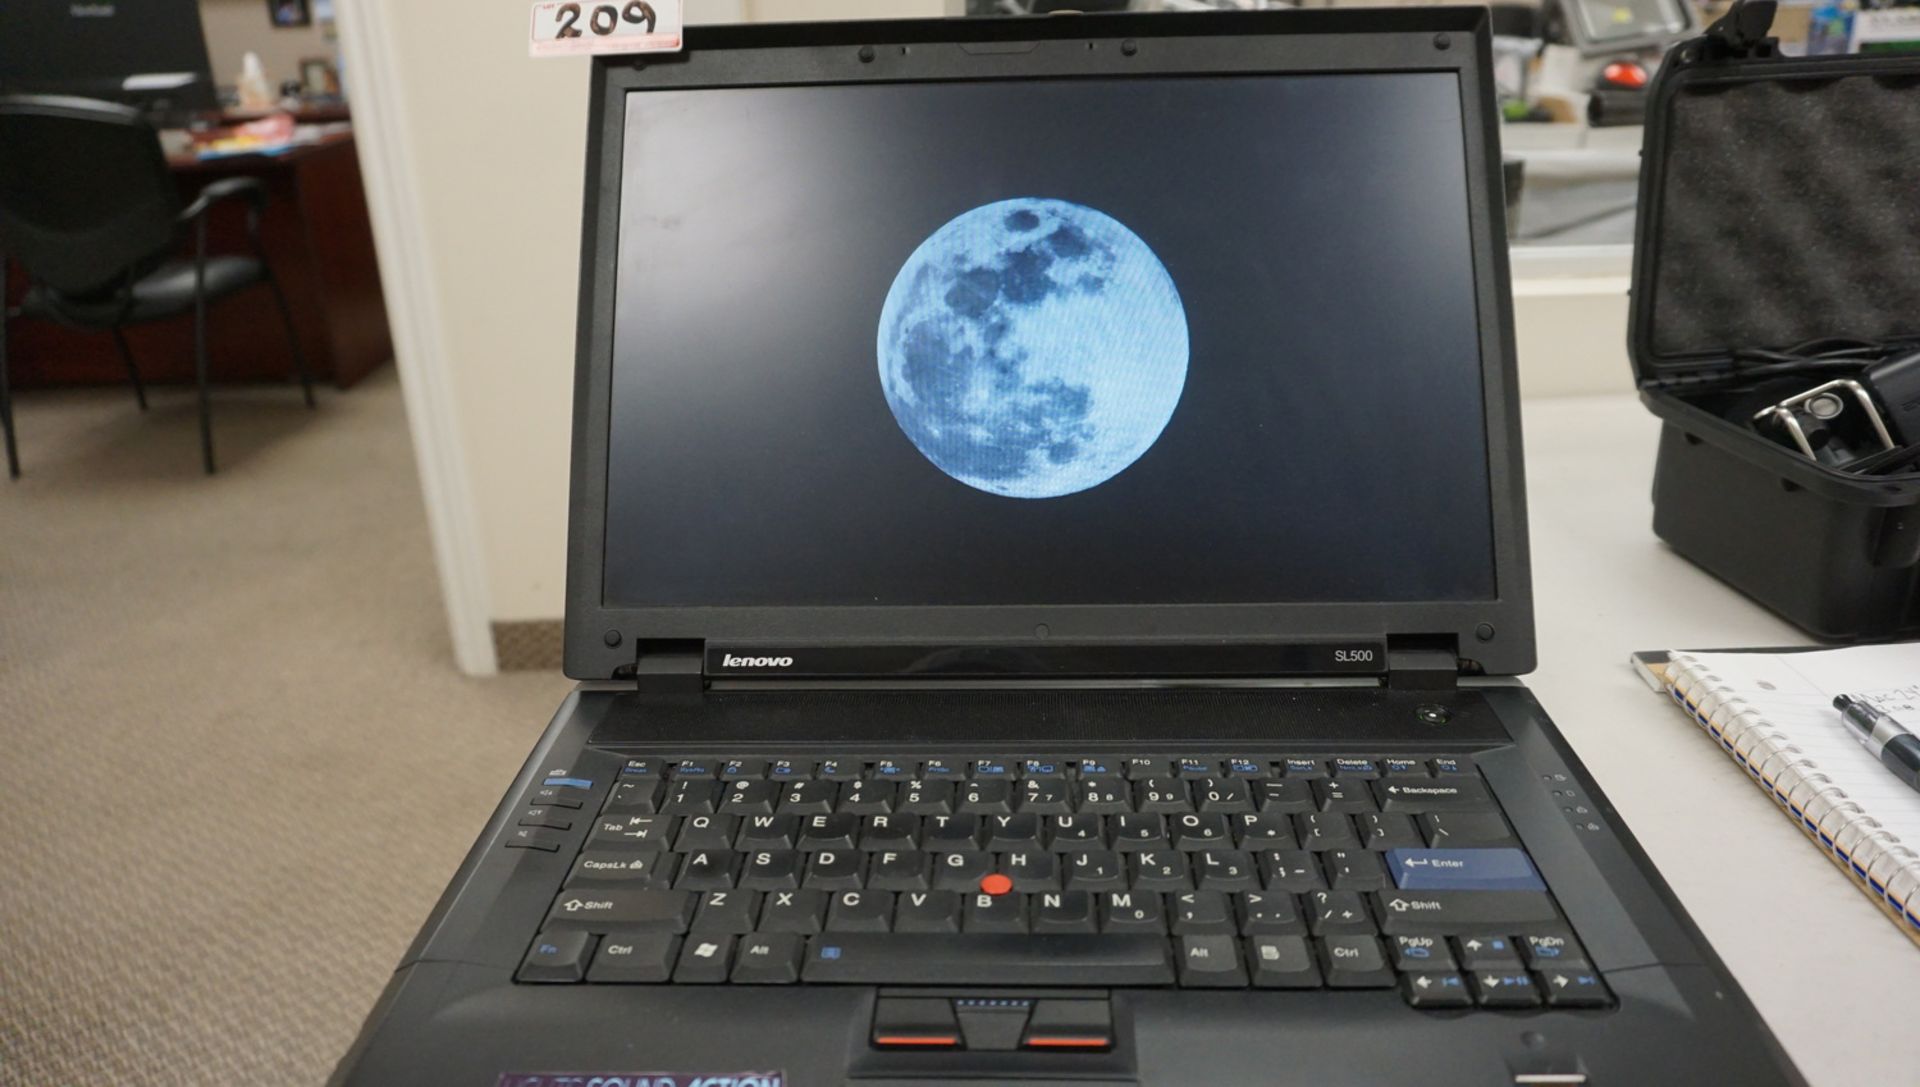 LENOVO SL500 LAPTOP W/ INTEL CORE 2 DUO 2.4GHZ CPU, 3GB RAM C/W VIDEO SPECIAL EFFECTS CLIPS - Image 3 of 4